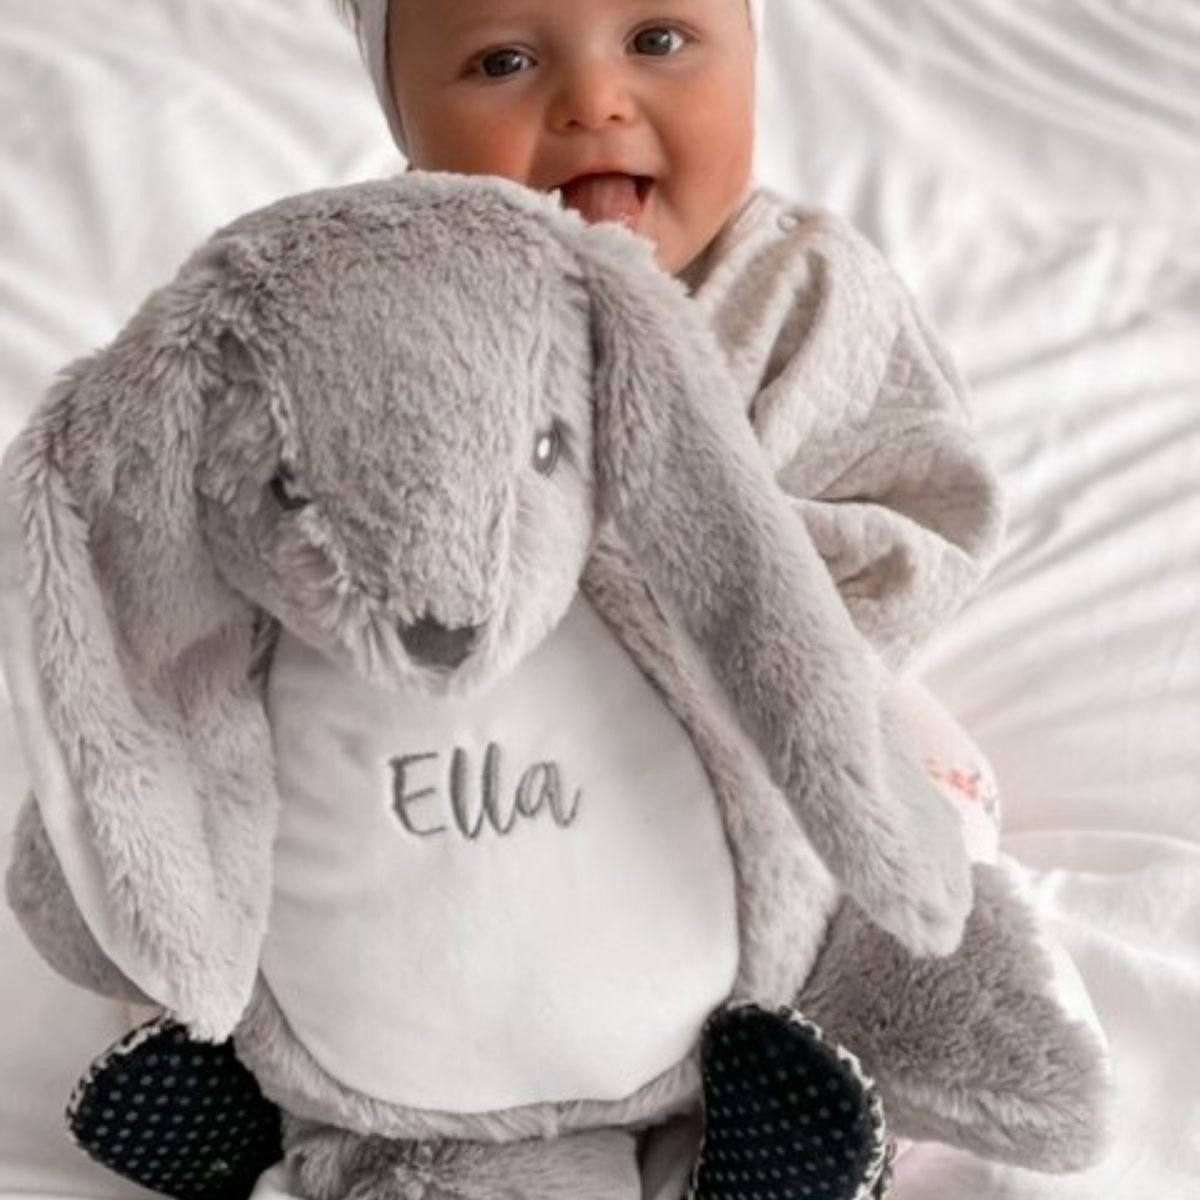 Ella with her Personalised Bunny